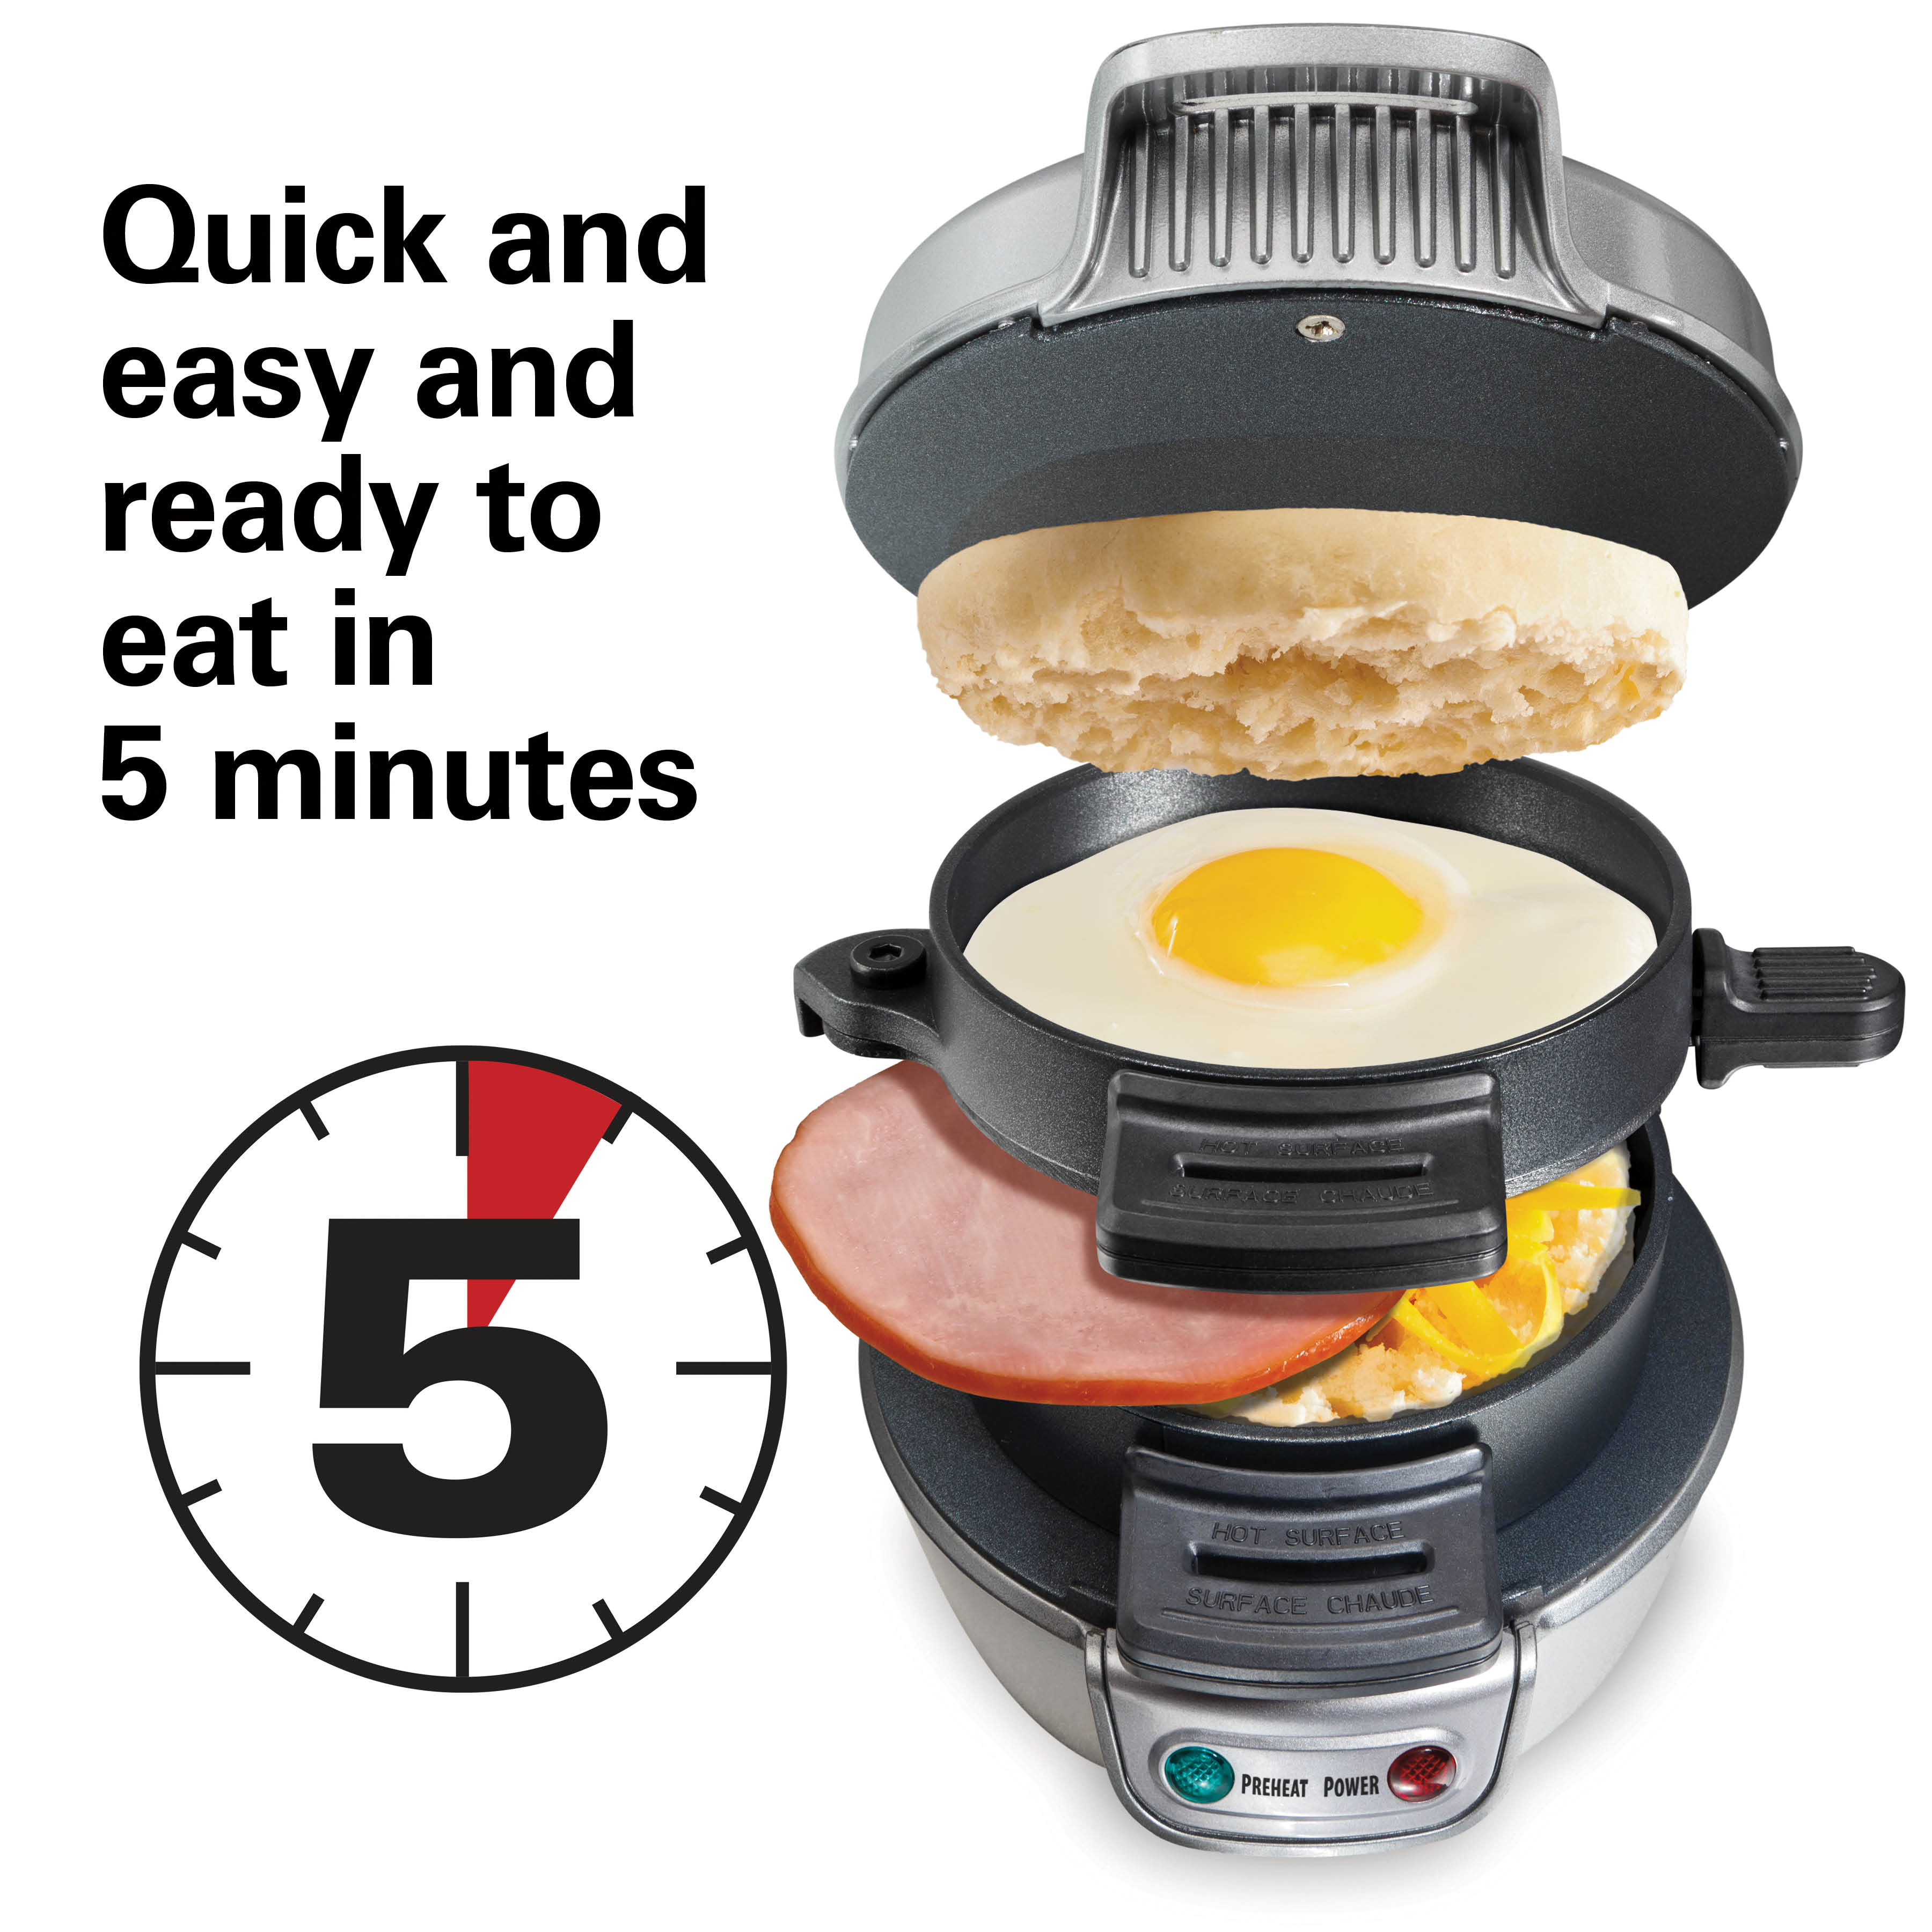 Hamilton Beach Breakfast Sandwich Maker with Egg Cooker Ring, Customize Ingredients, Silver, 25475 - image 3 of 9